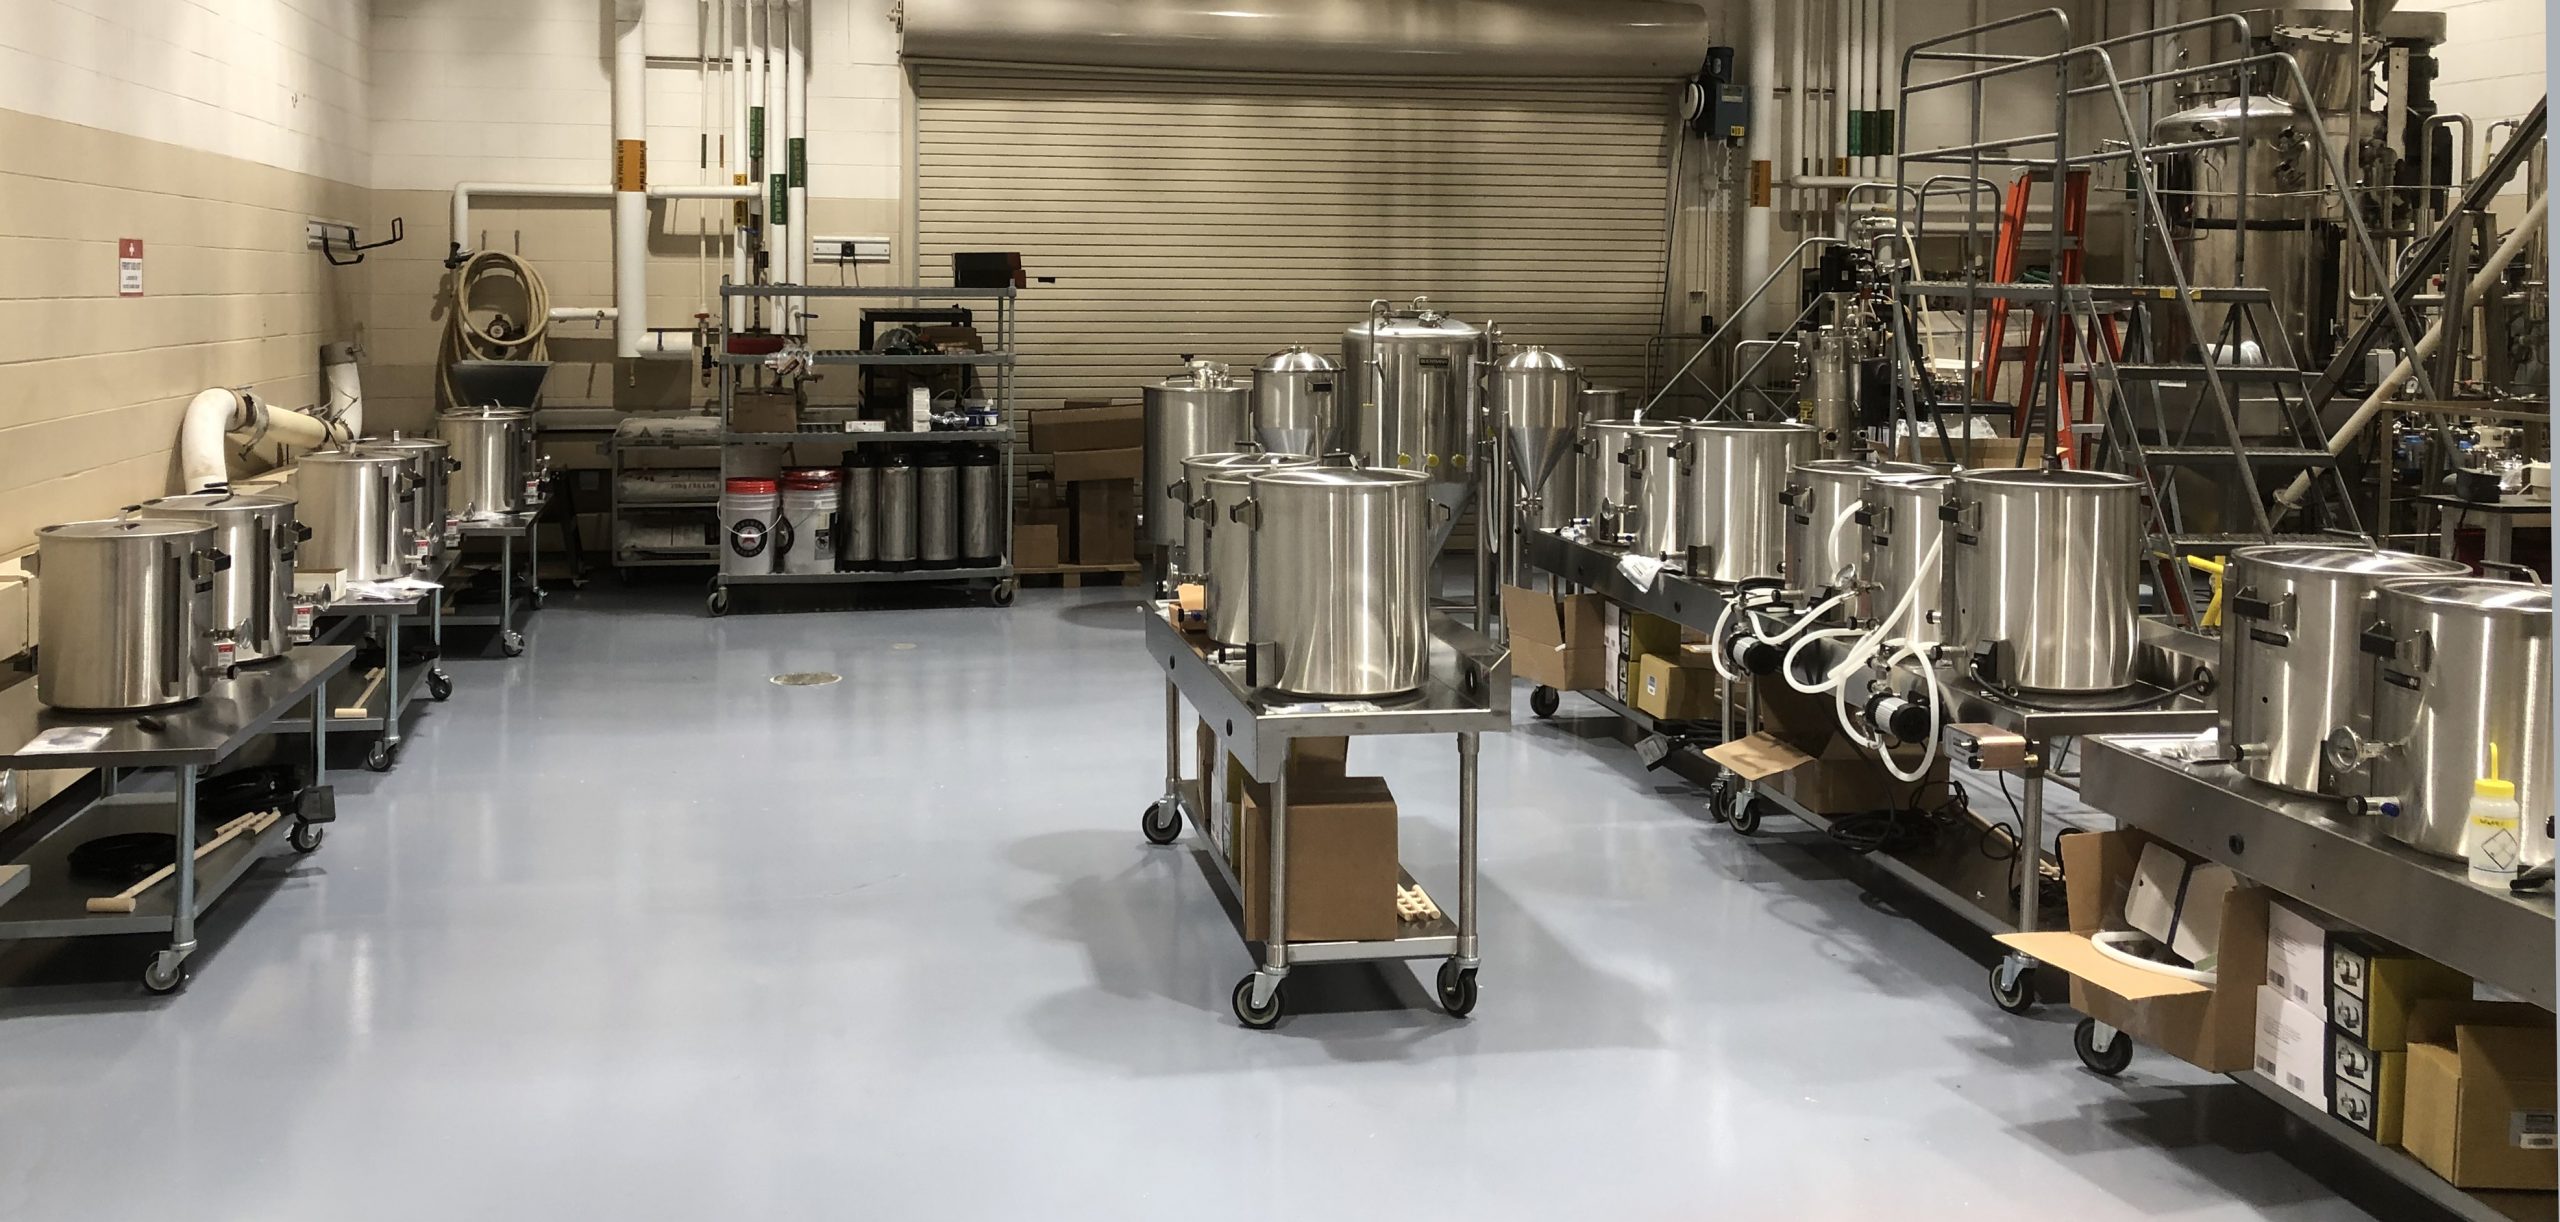 New course teaches the art and science of beer brewing - College of  Engineering News